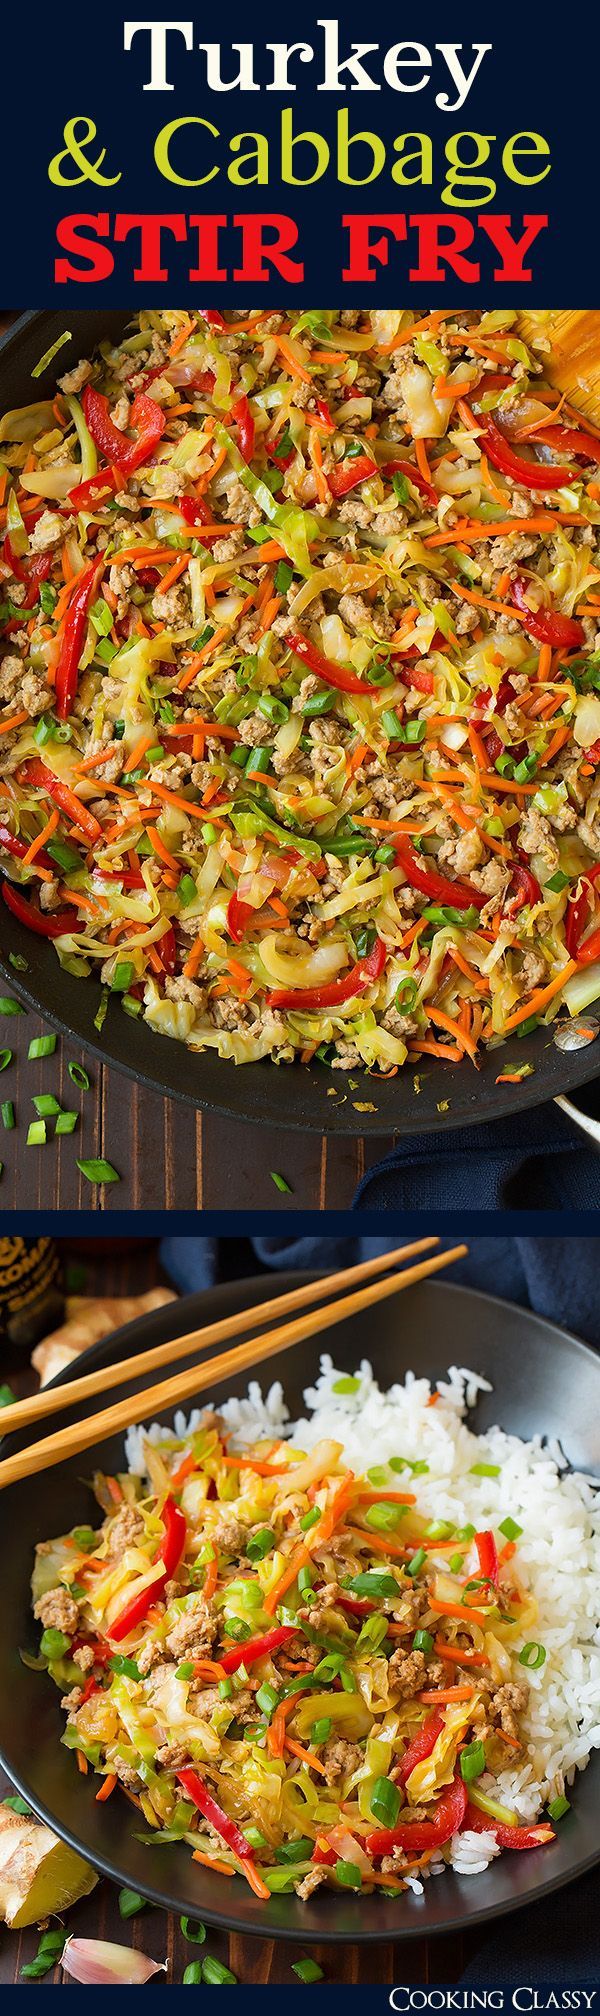 Turkey and Cabbage Stir Fry (aka Egg Roll Skillet) | Cooking Classy